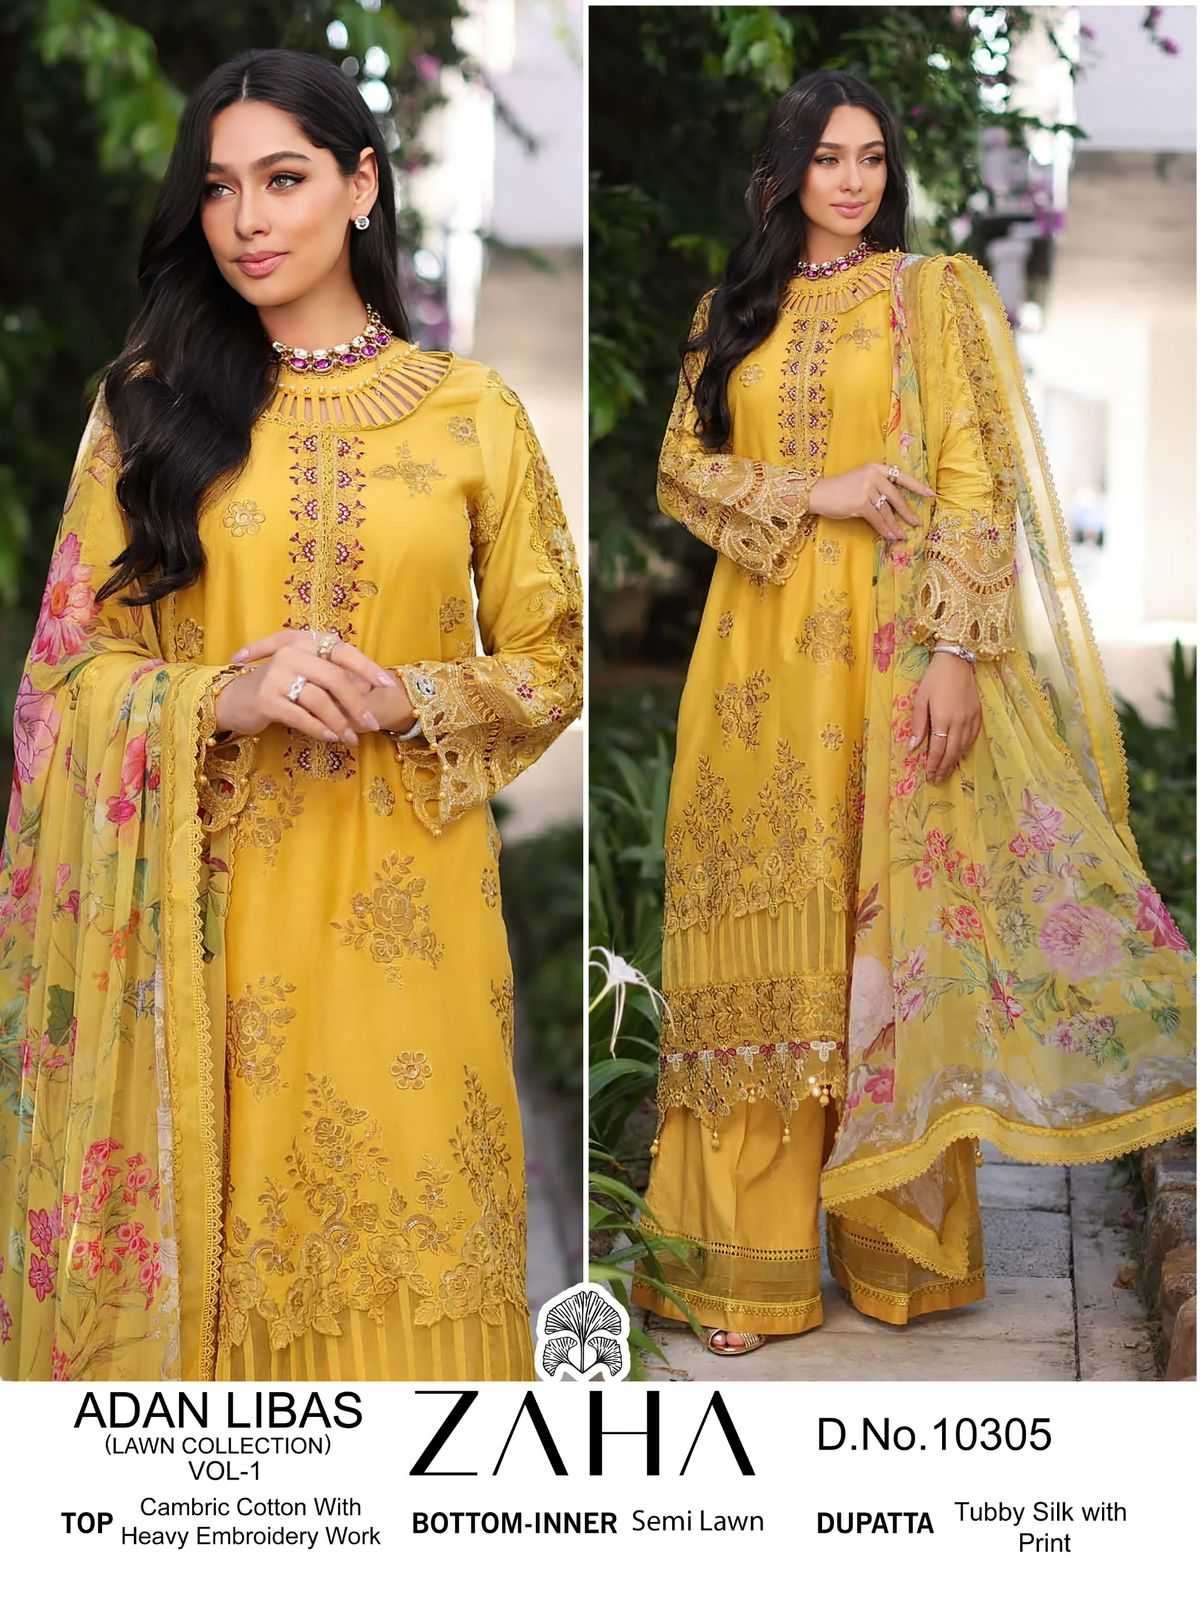 ADAN LIBAS LAWN COLLECTION VOL-1 SERIES 10305 TO 10307 BY ZAHA DESIGNER WITH WORK CAMBRIC COTTON PAKISTANI STYLE SUITS ARE AVAILABLE AT WHOLESALE PRICE